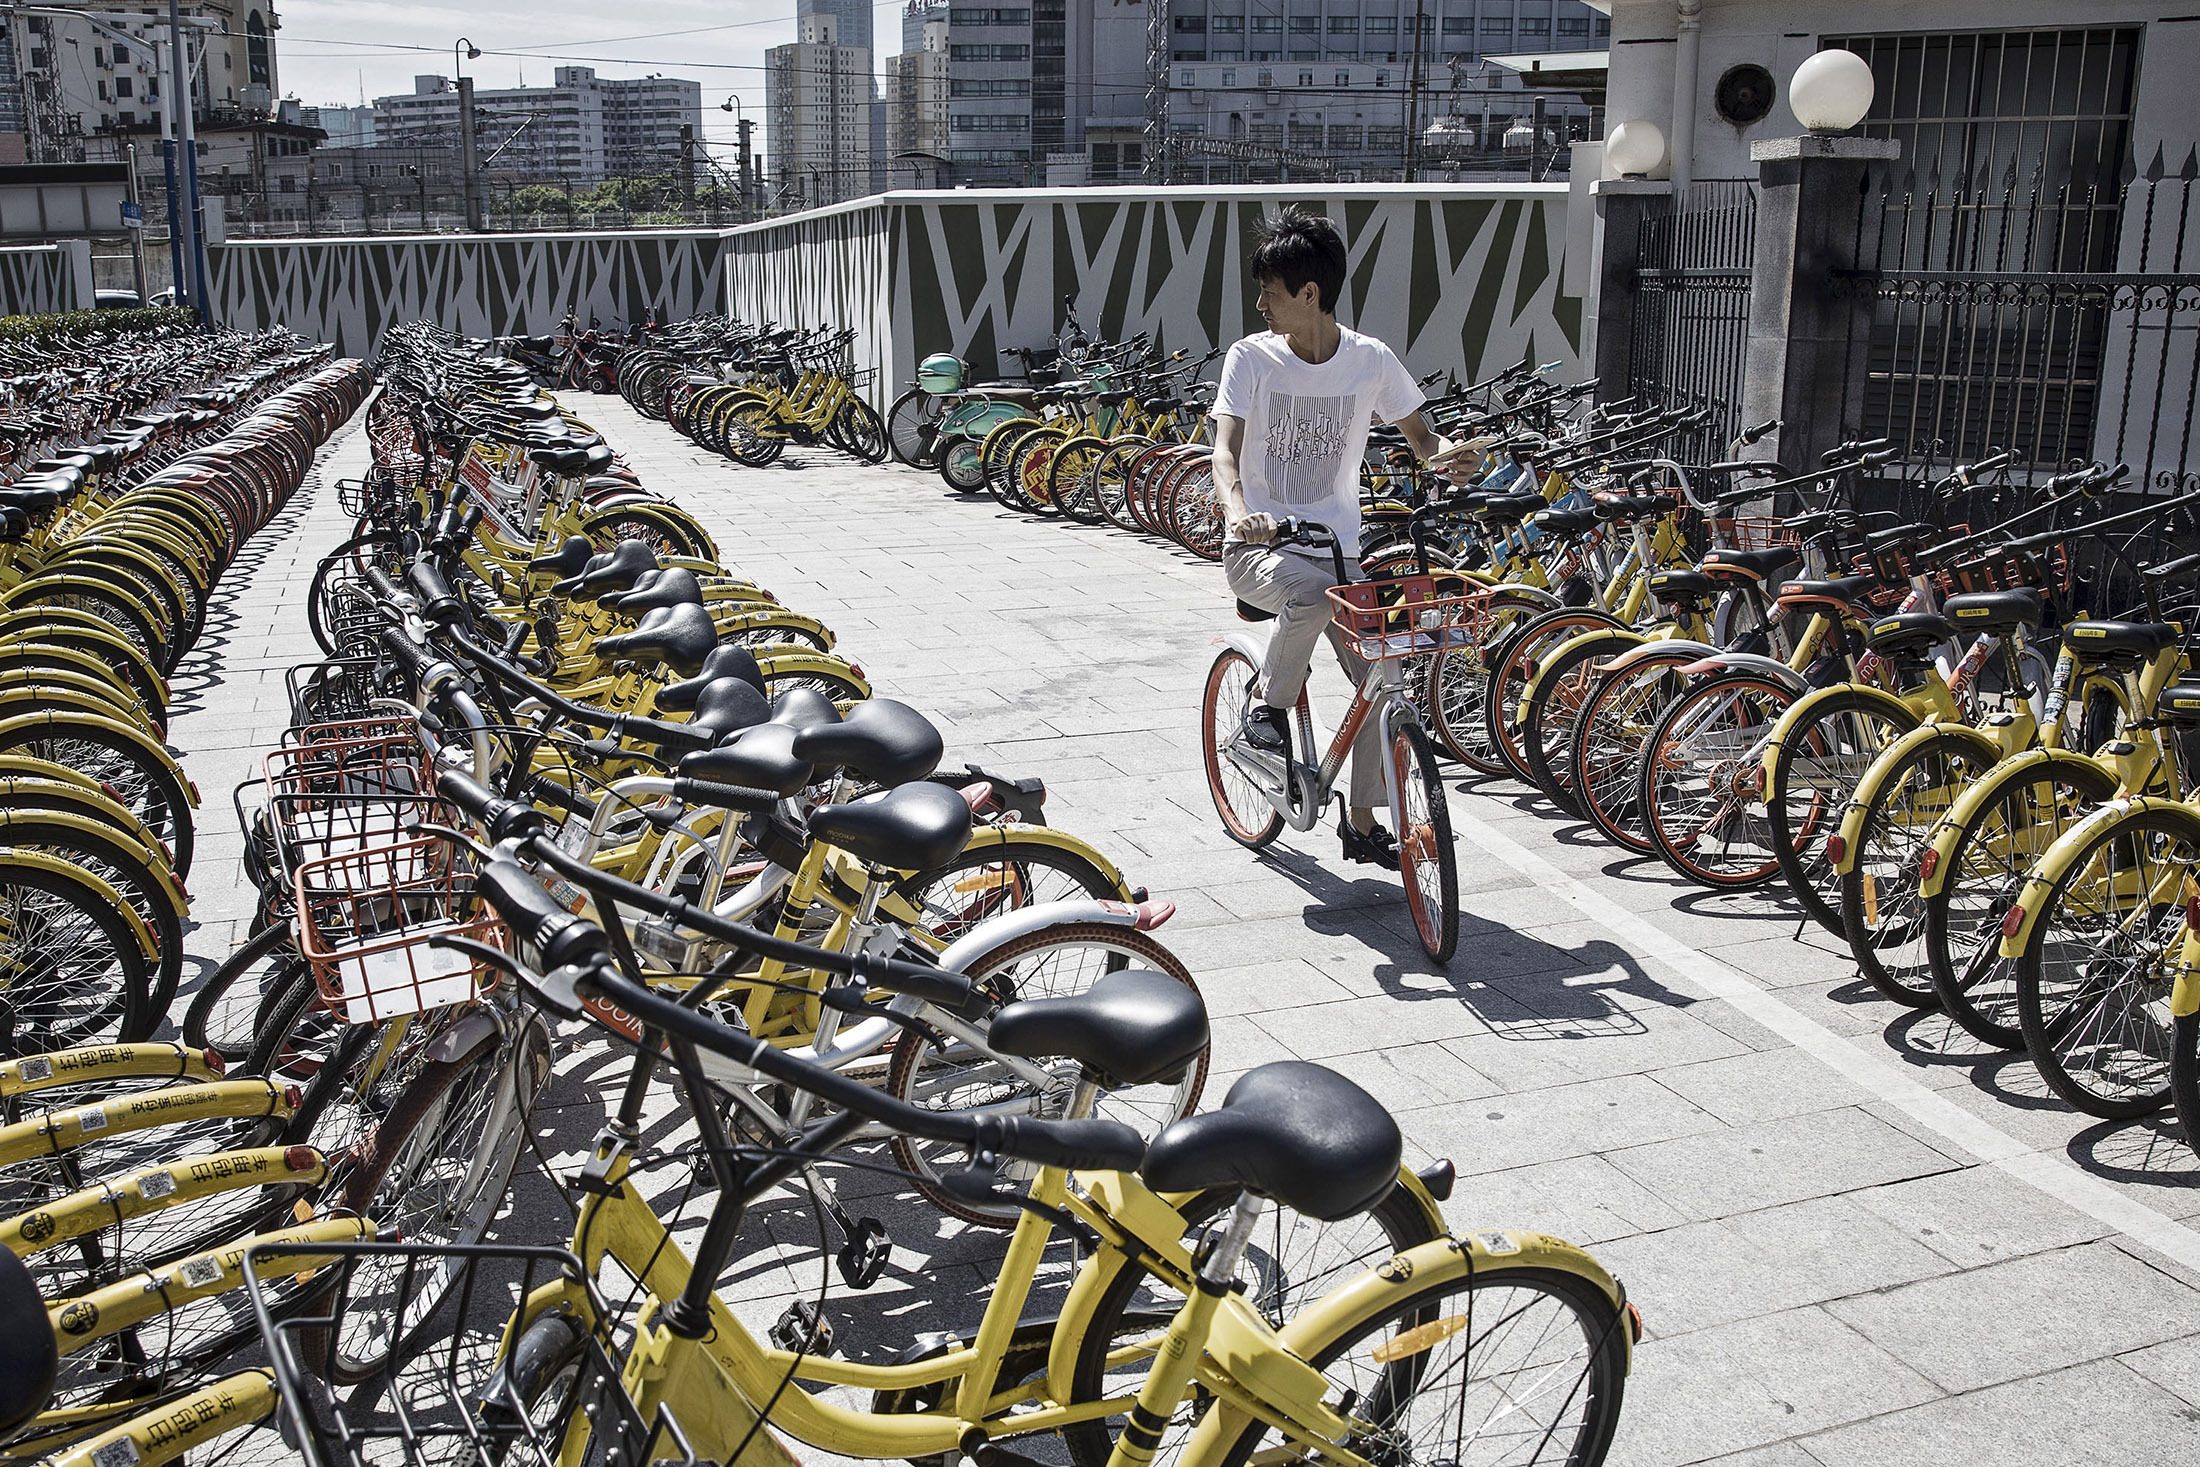 Bike sharing companies revisit docking options to avoid clutter in Japan